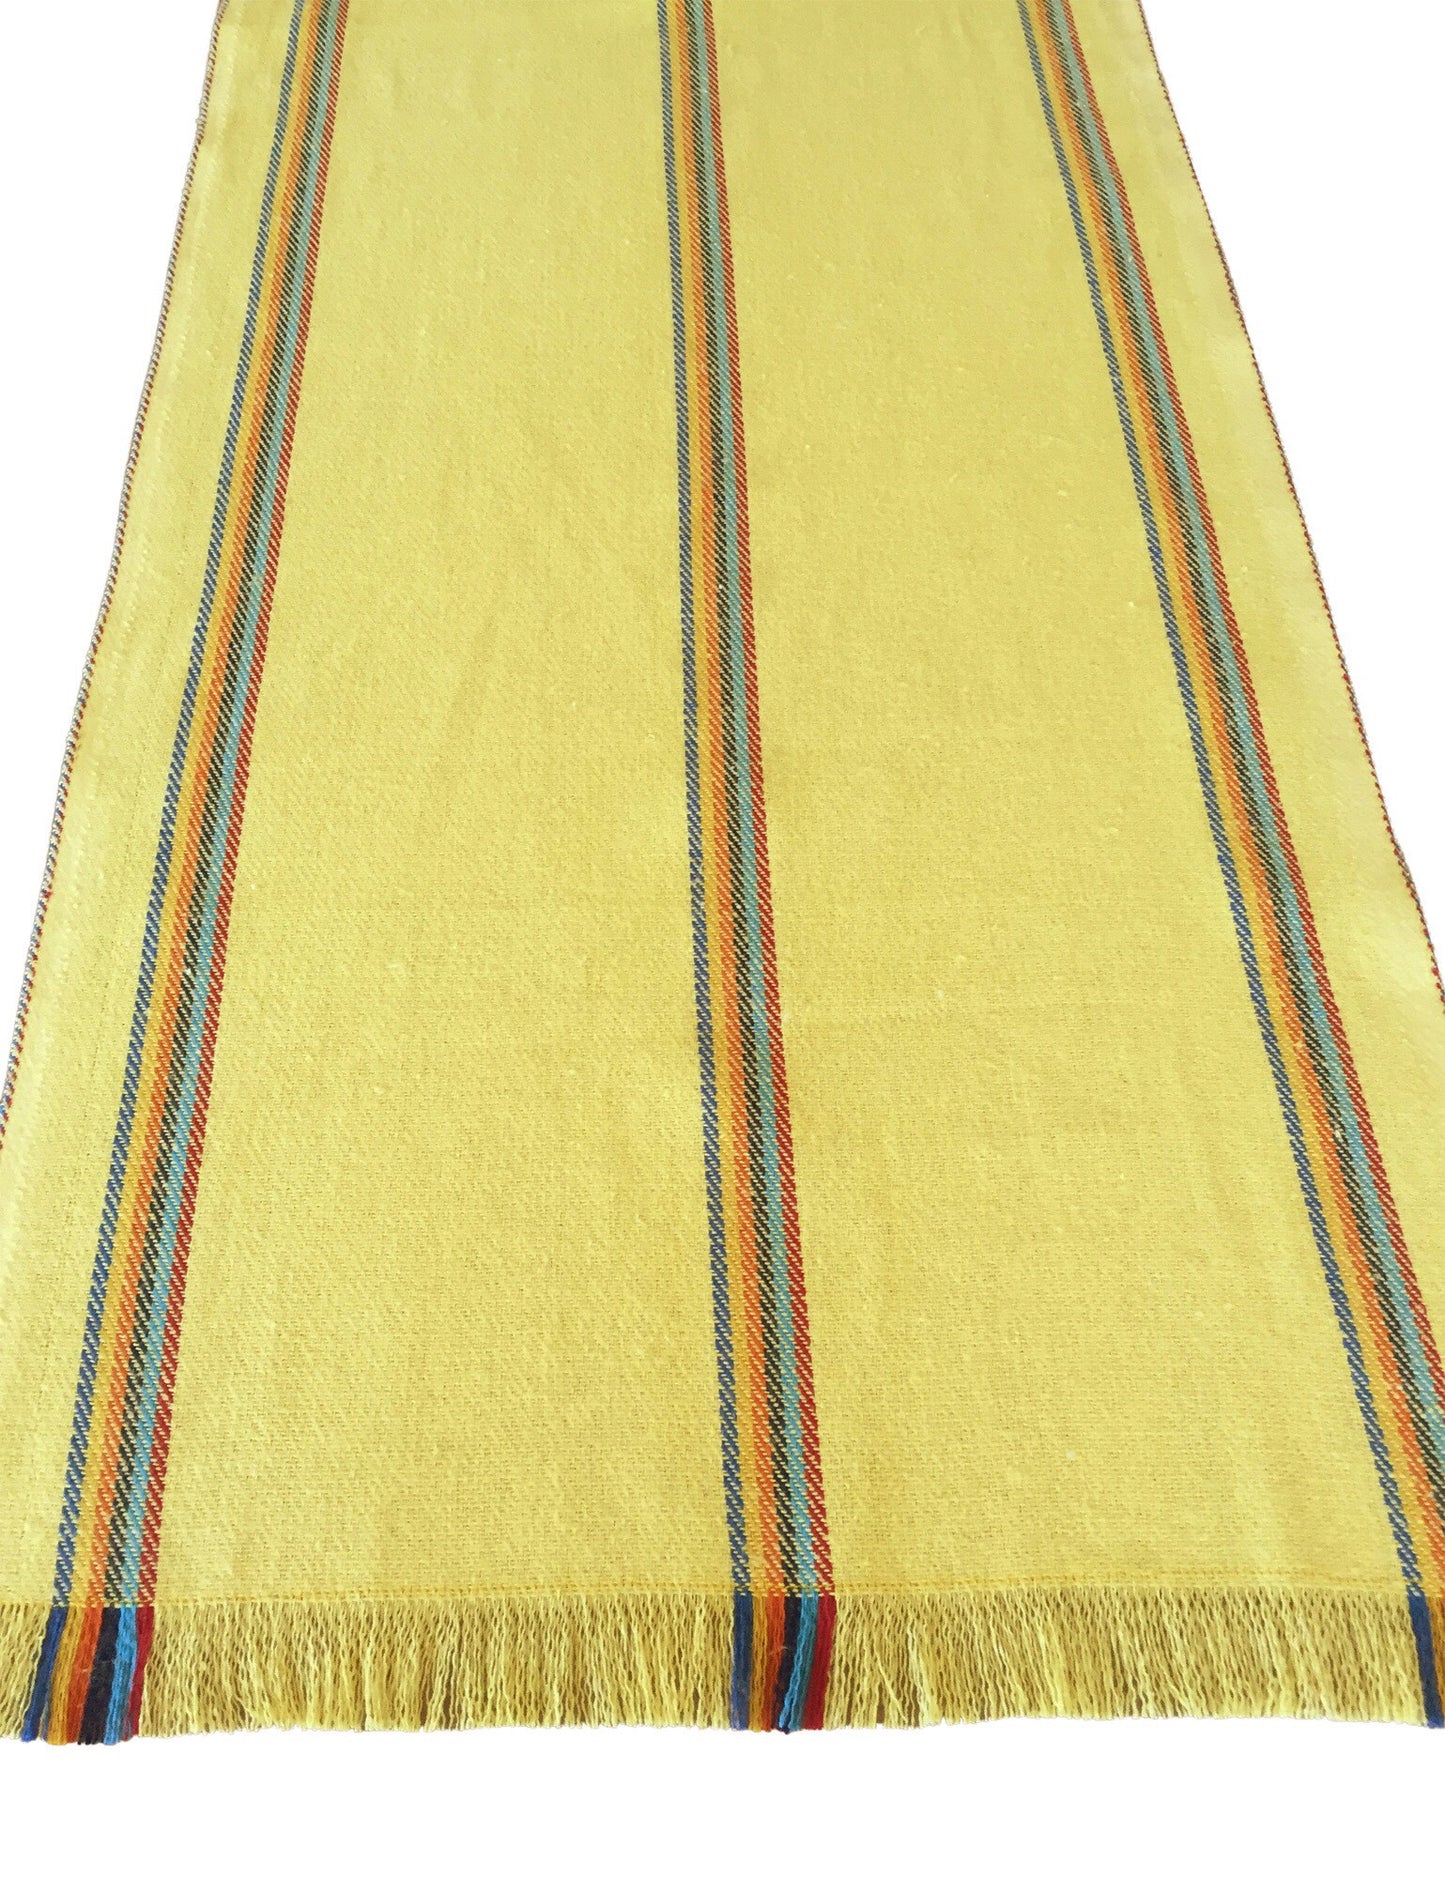 Mexican yellow jerga table runner - MesaChic - 1